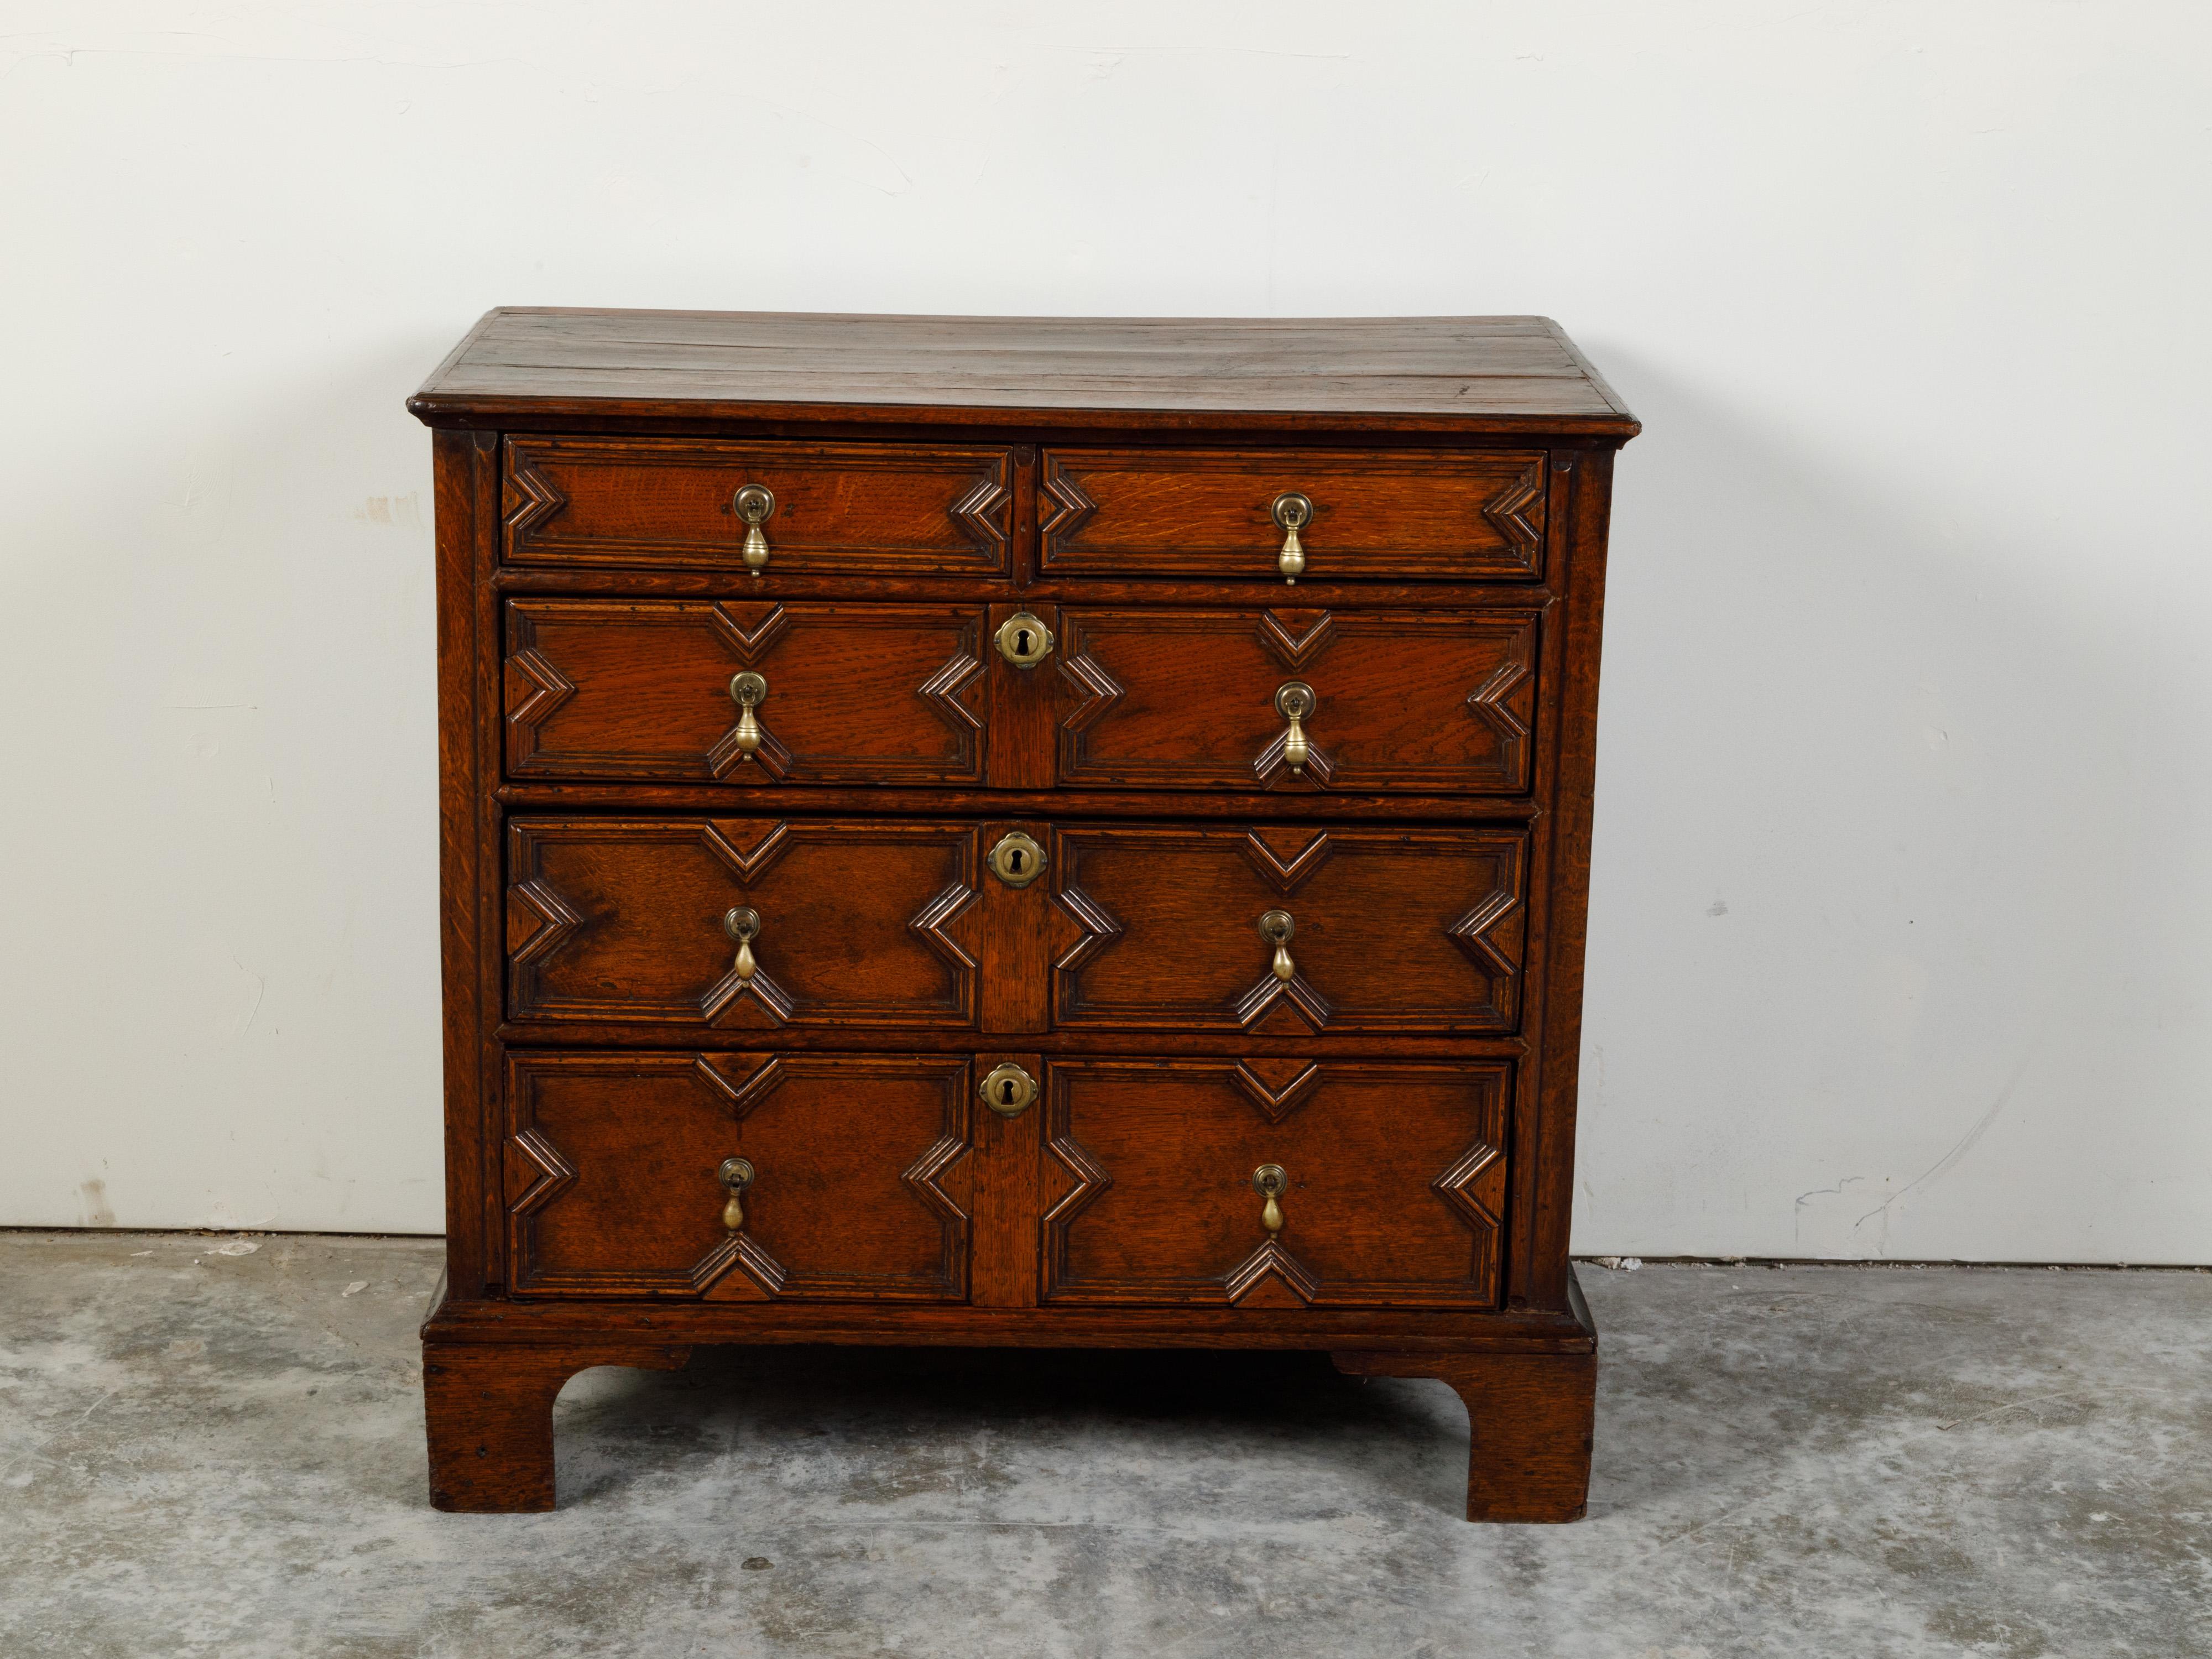 An English Georgian period oak geometric front five-drawer chest from the early 19th century, with bracket feet. Created in England during the early years of the 19th century, this Georgian chest features a rectangular planked top sitting above five